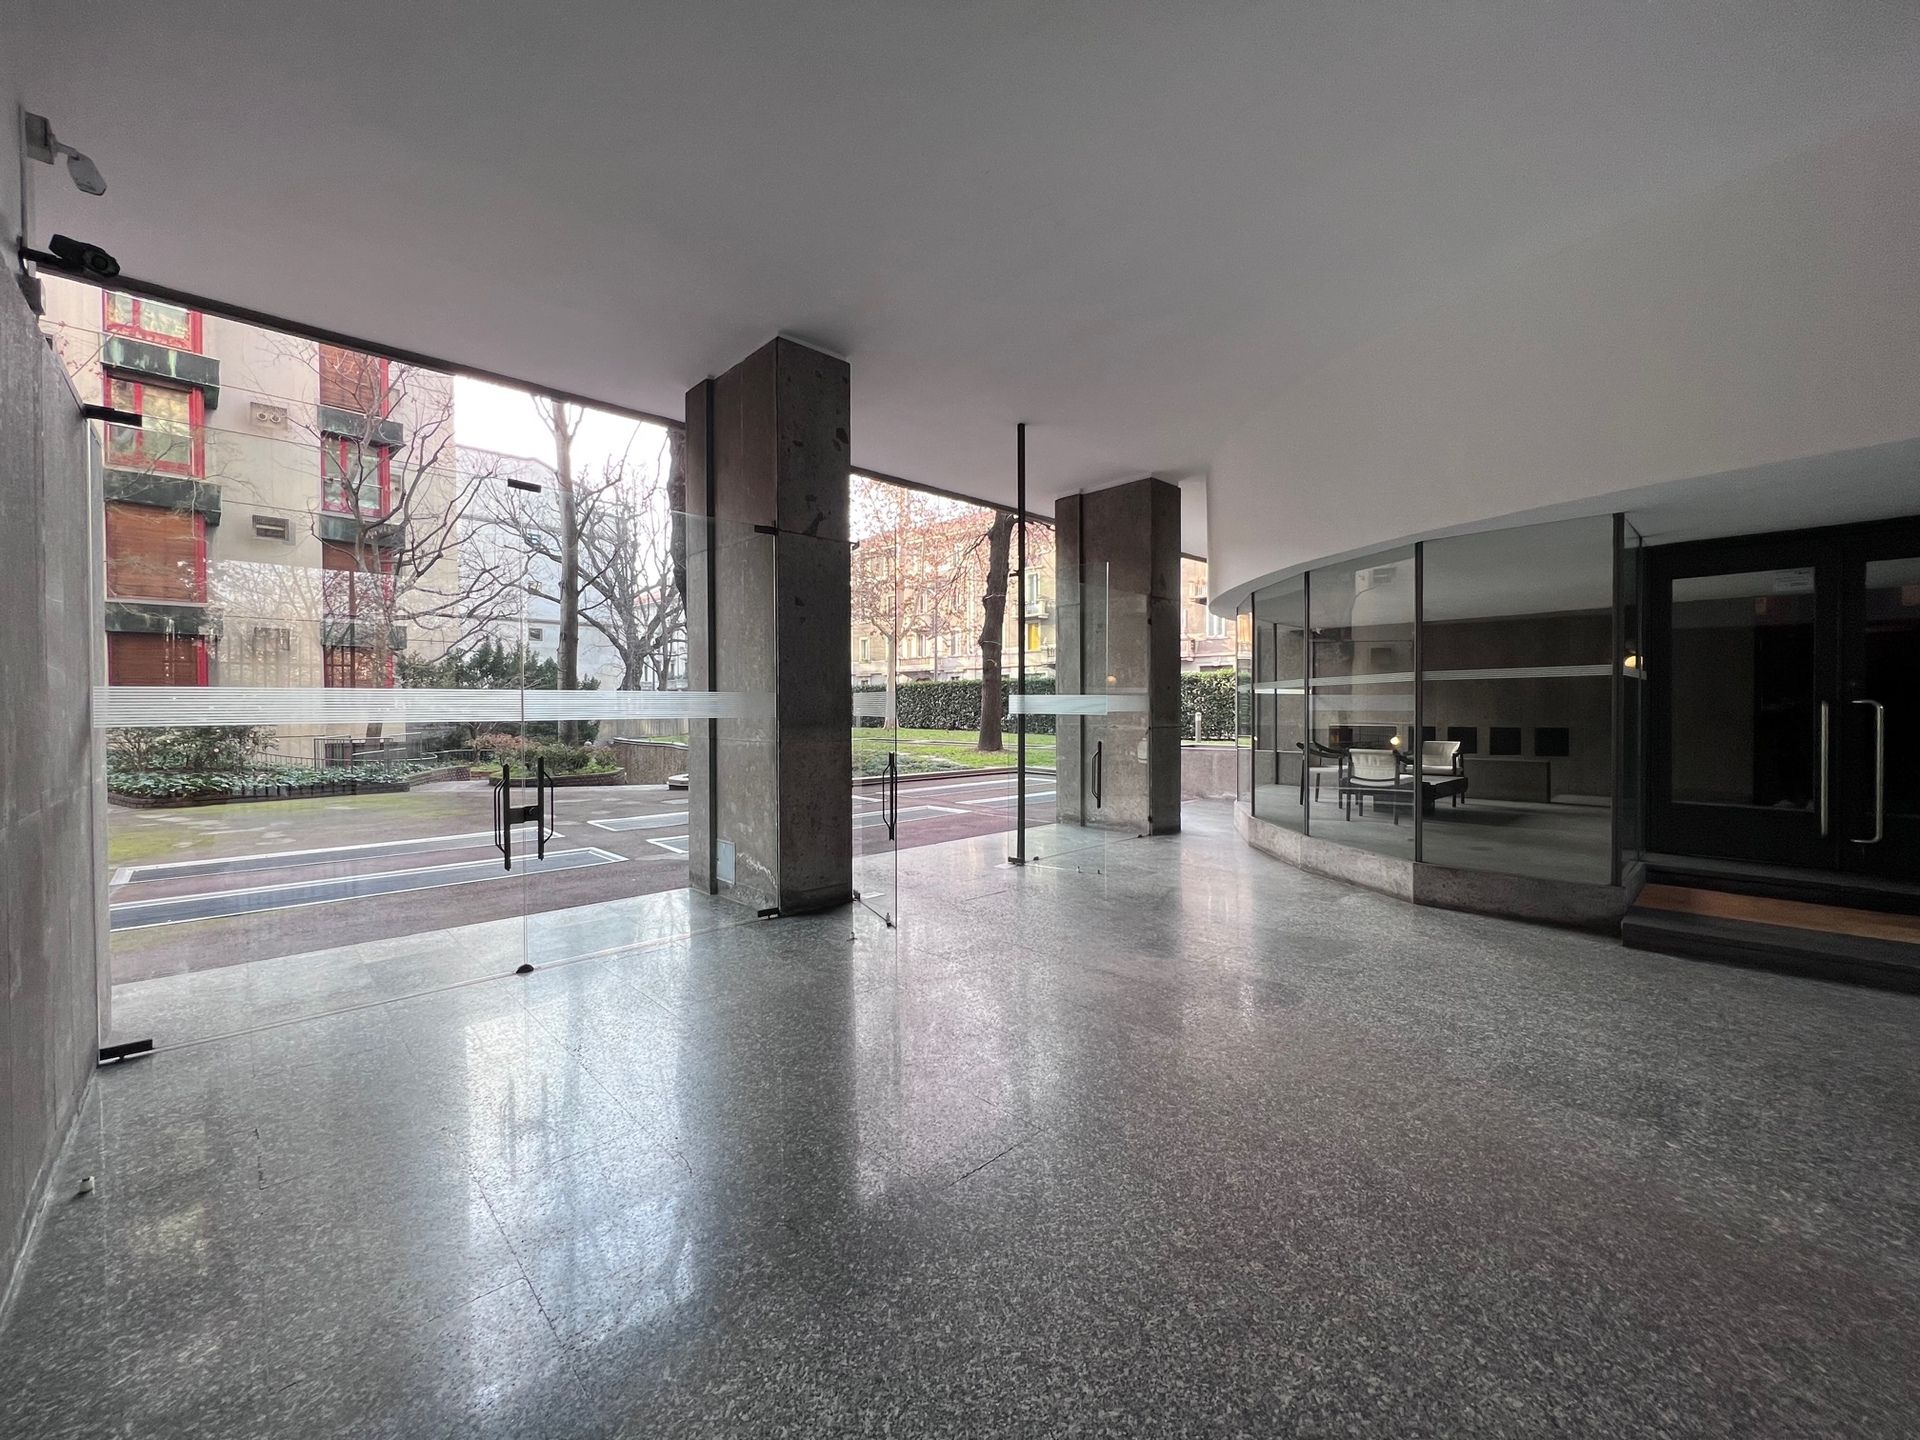 For sale apartment in city Milano Lombardia